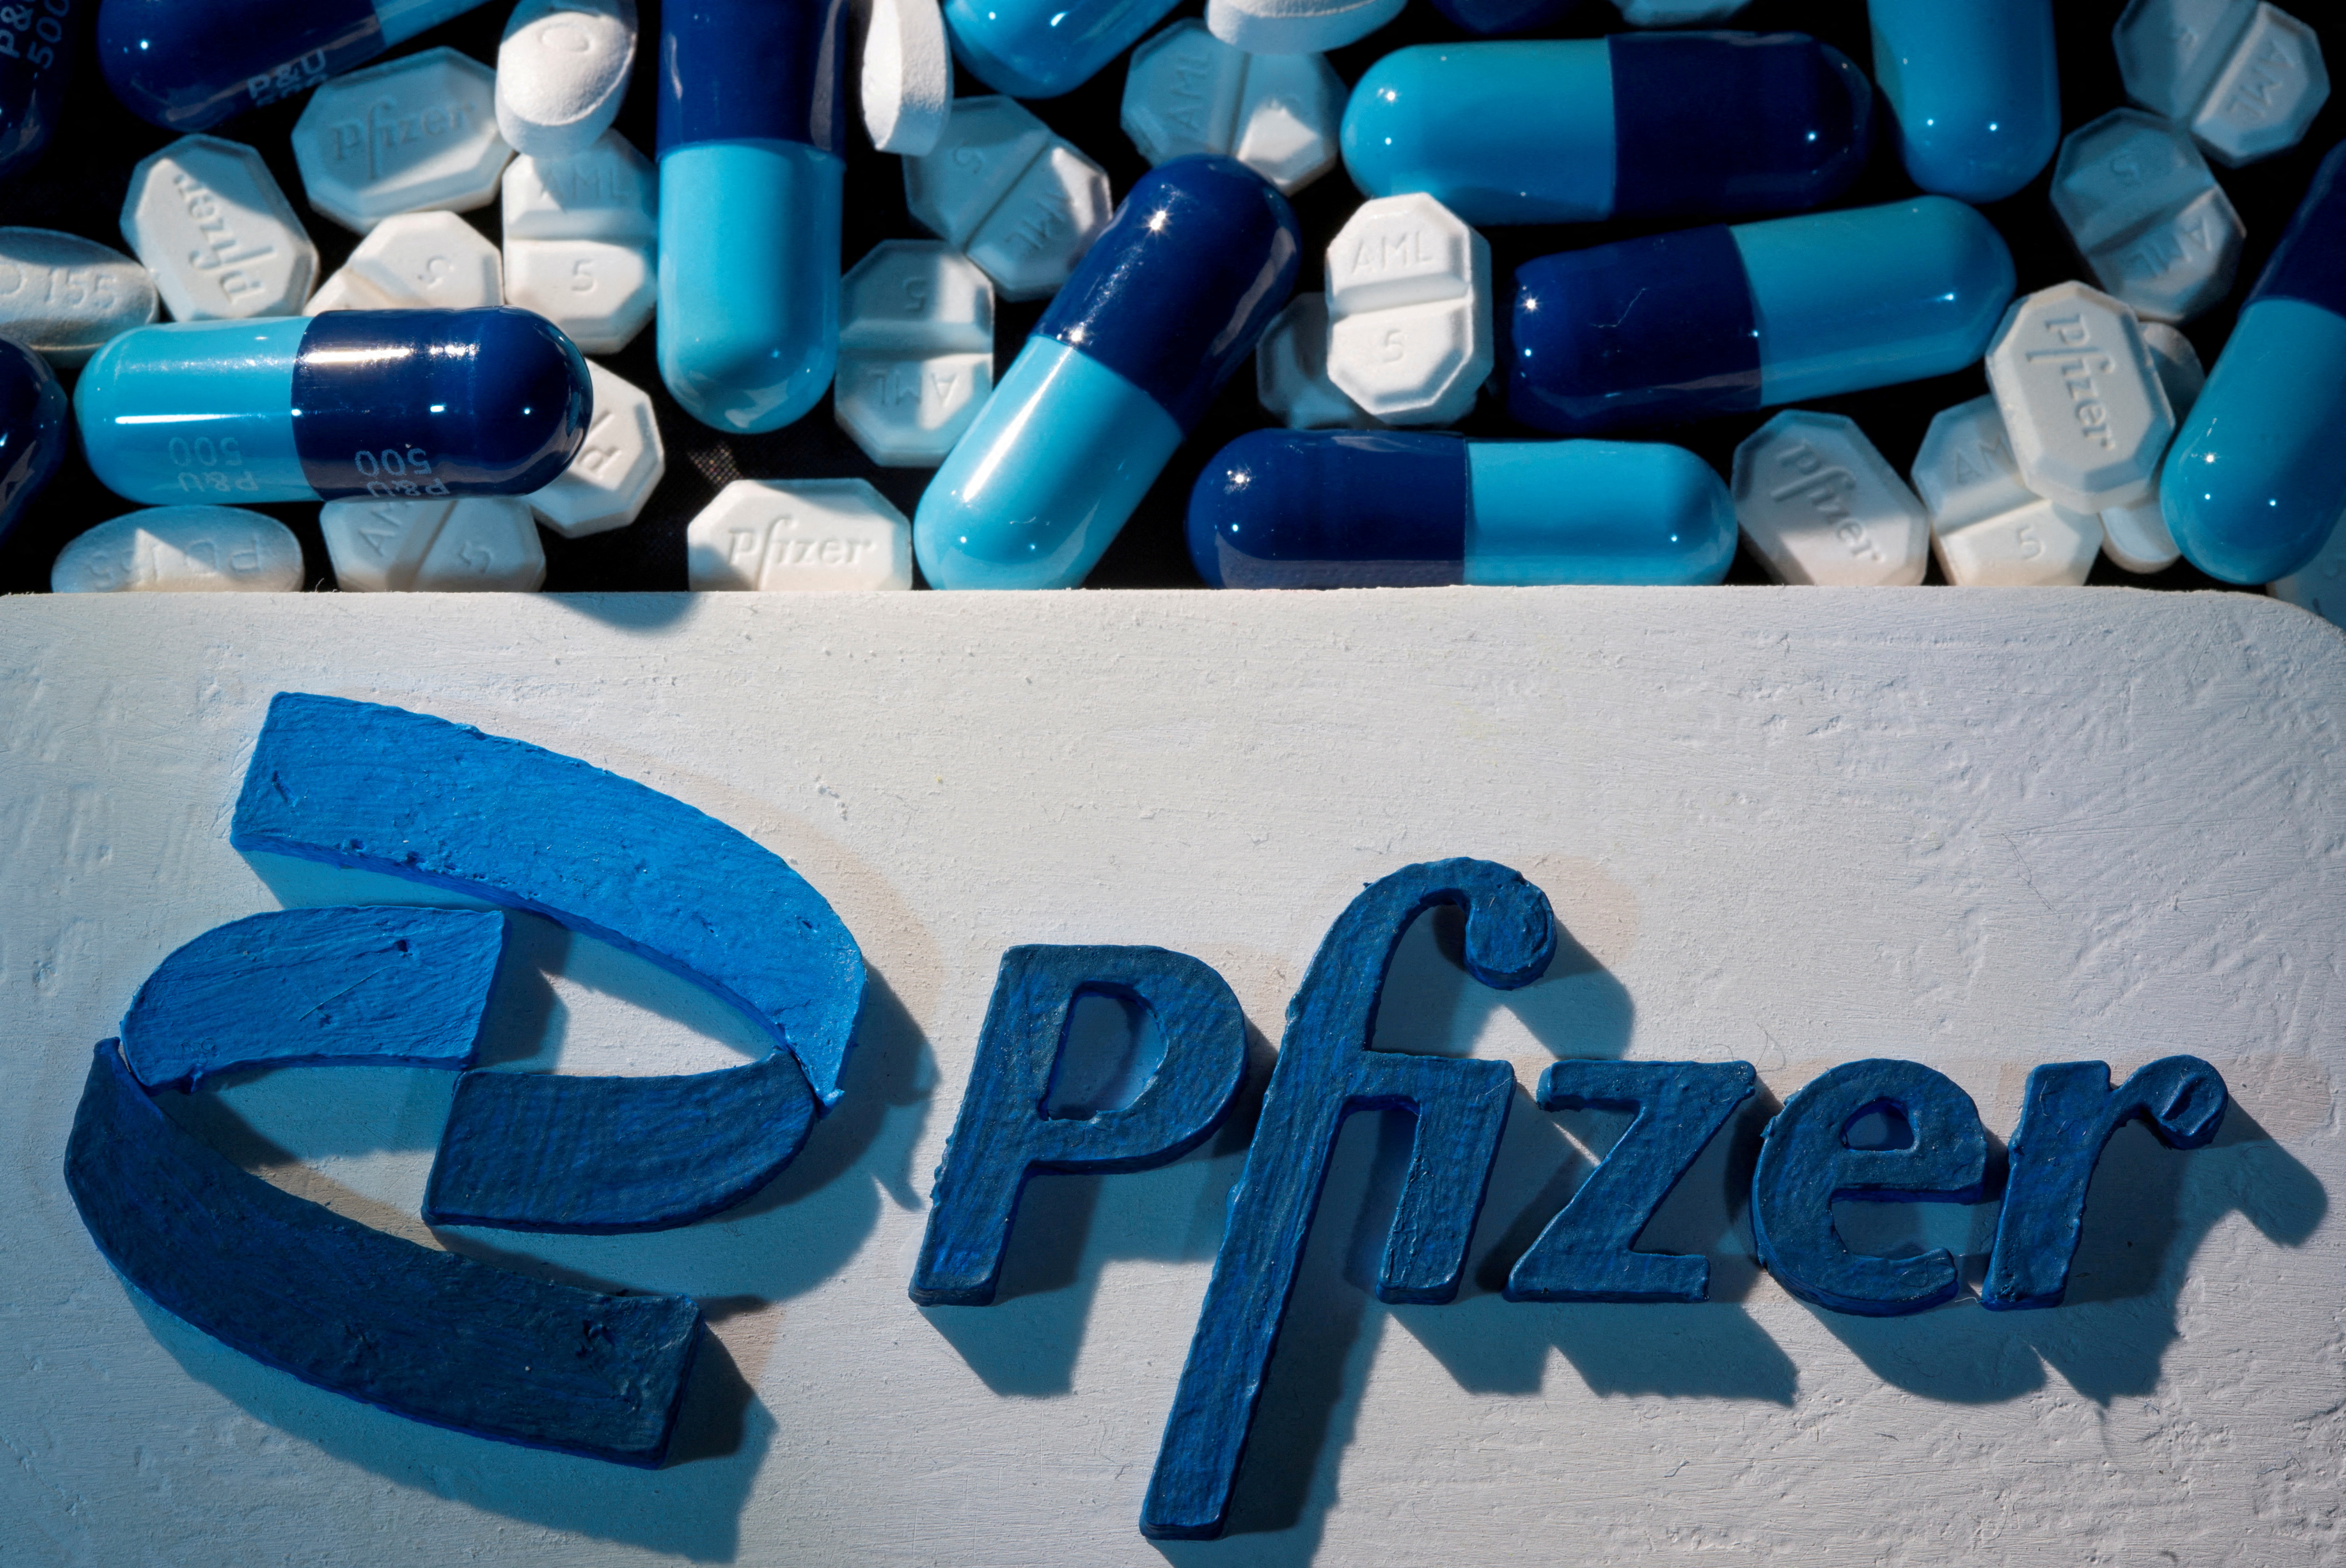 3D printed Pfizer logo is placed near medicines from the same manufacturer in this illustration